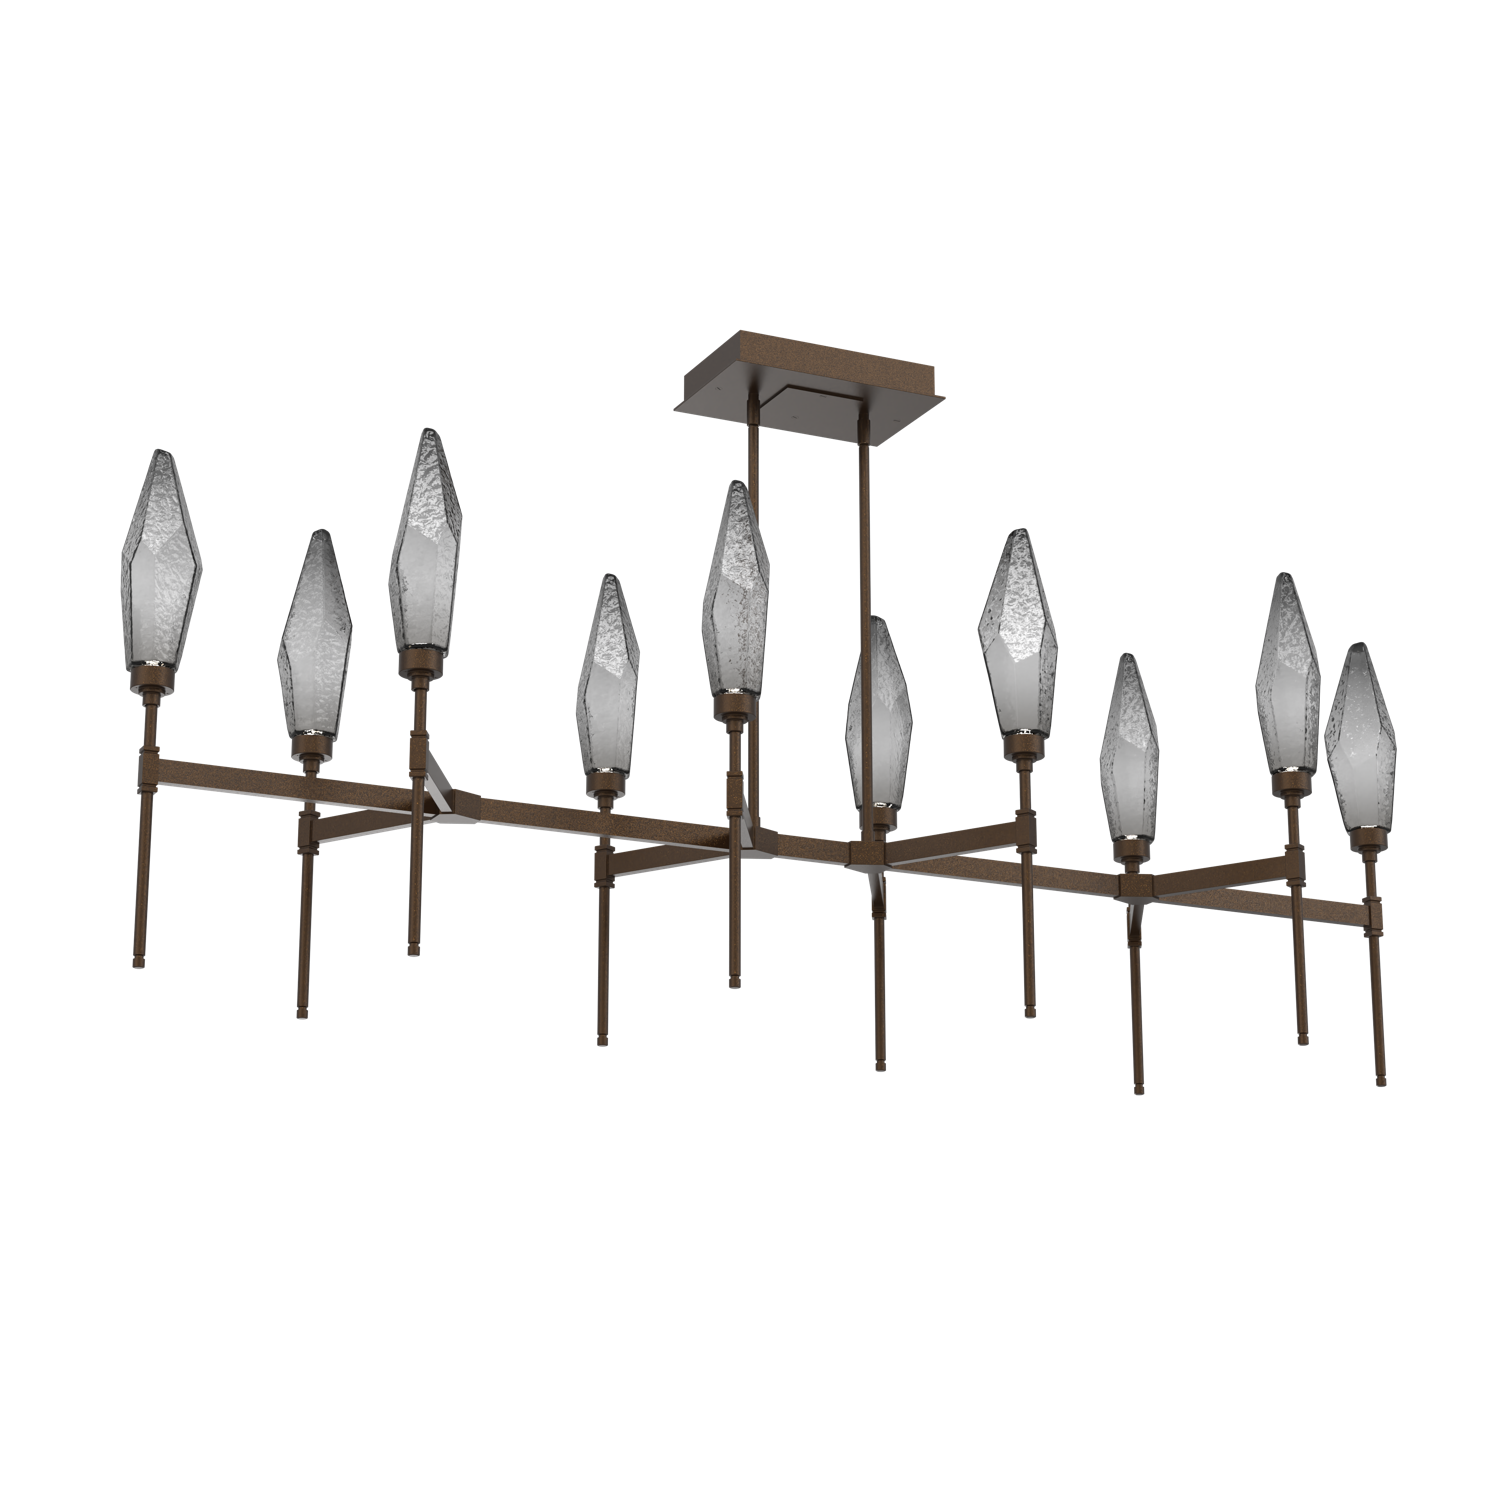 PLB0050-67-FB-CS-Hammerton-Studio-Rock-Crystal-67-inch-linear-belvedere-chandelier-with-flat-bronze-finish-and-chilled-smoke-glass-shades-and-LED-lamping